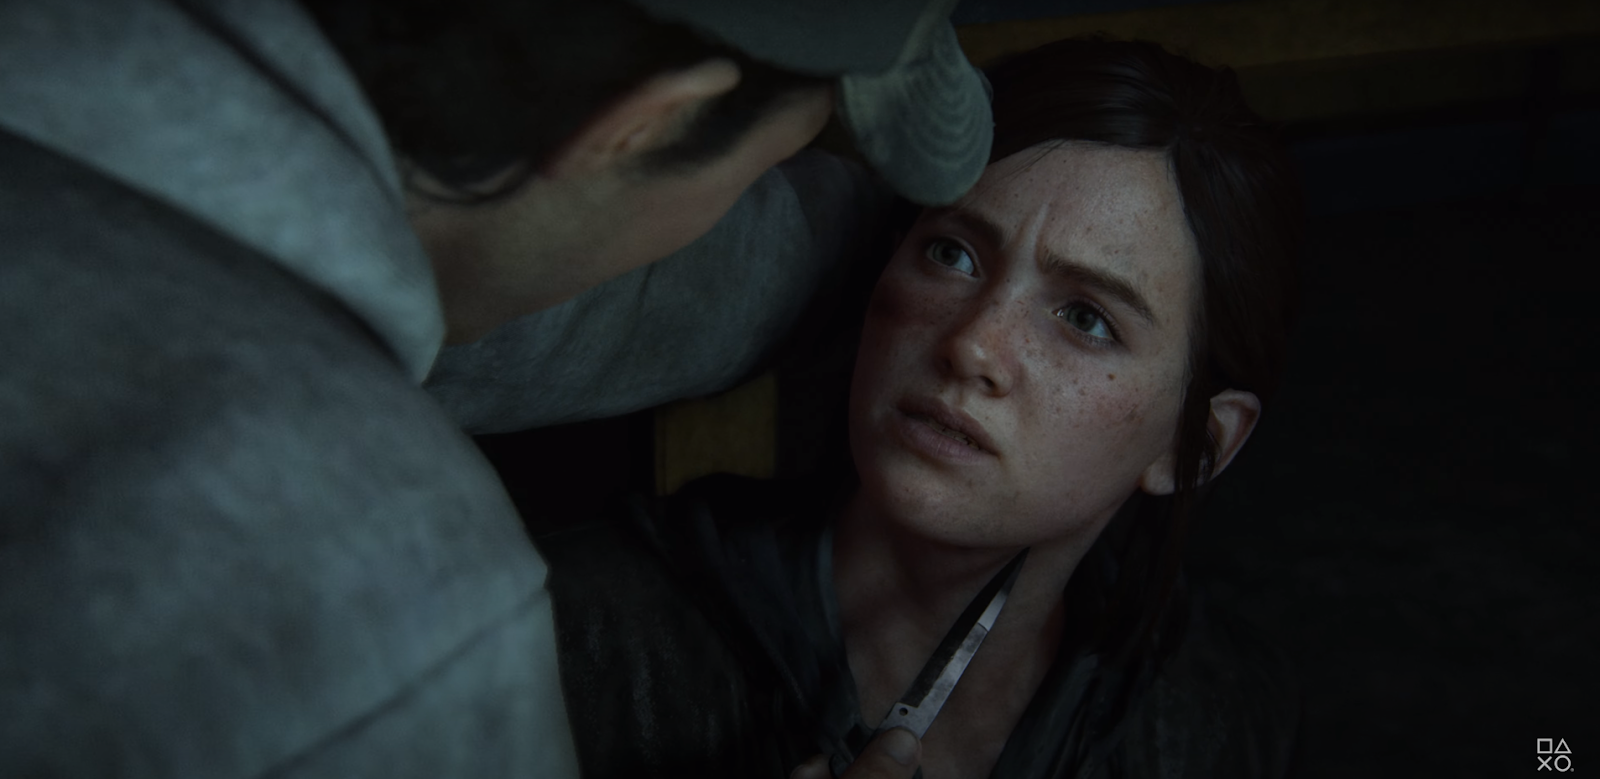 An in game screenshot of Ellie in The Last of Us Part 2 Remastered